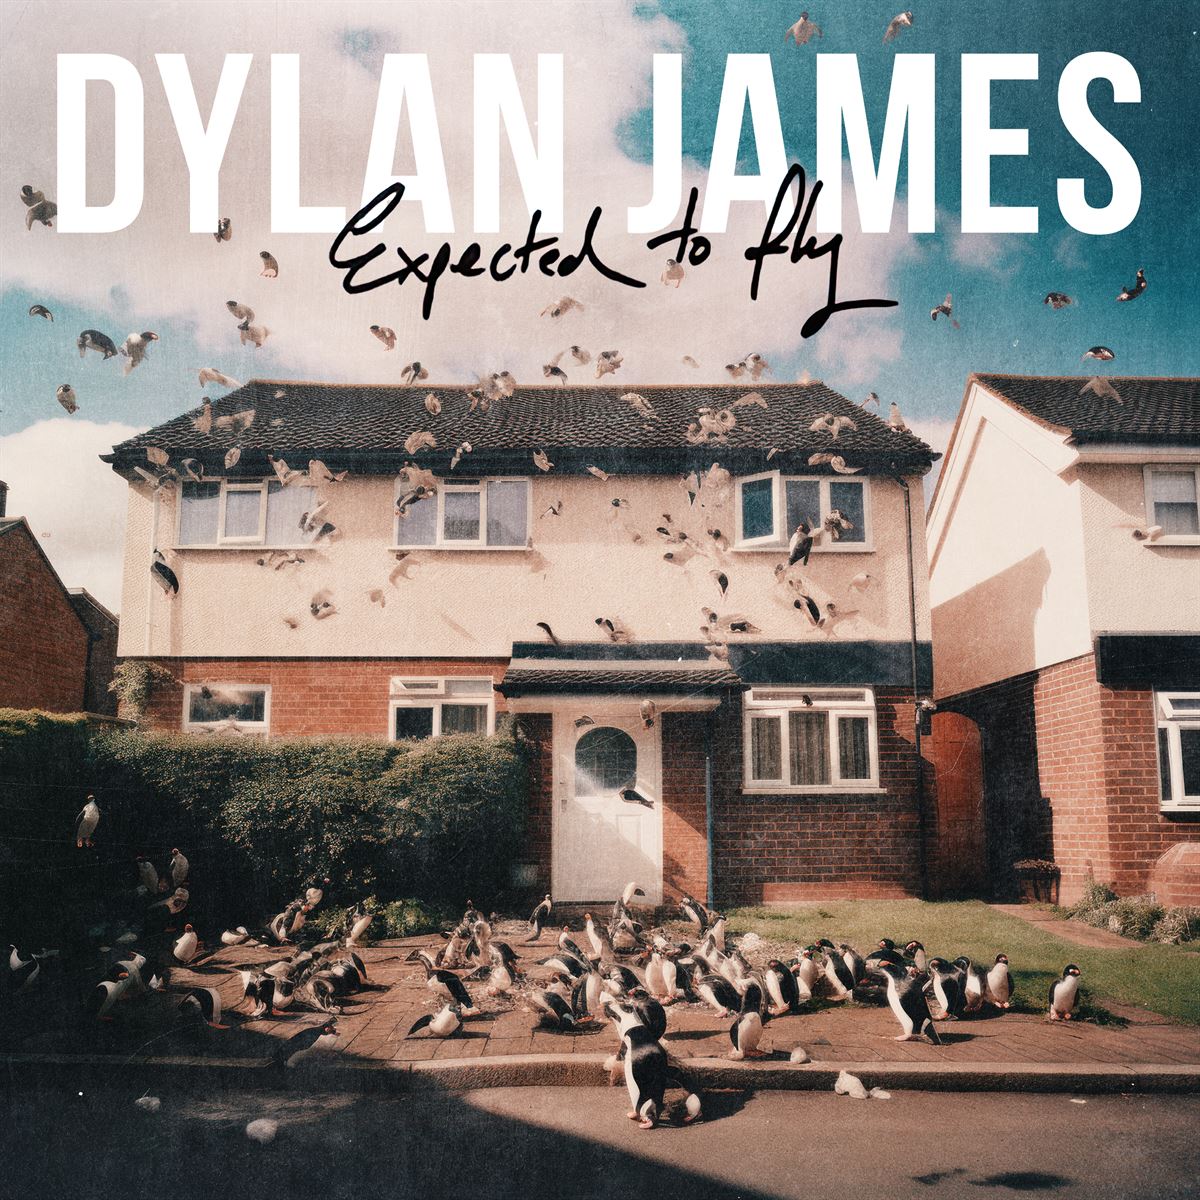 DEBUT ALBUM REVIEW: Expected to Fly by Dylan James